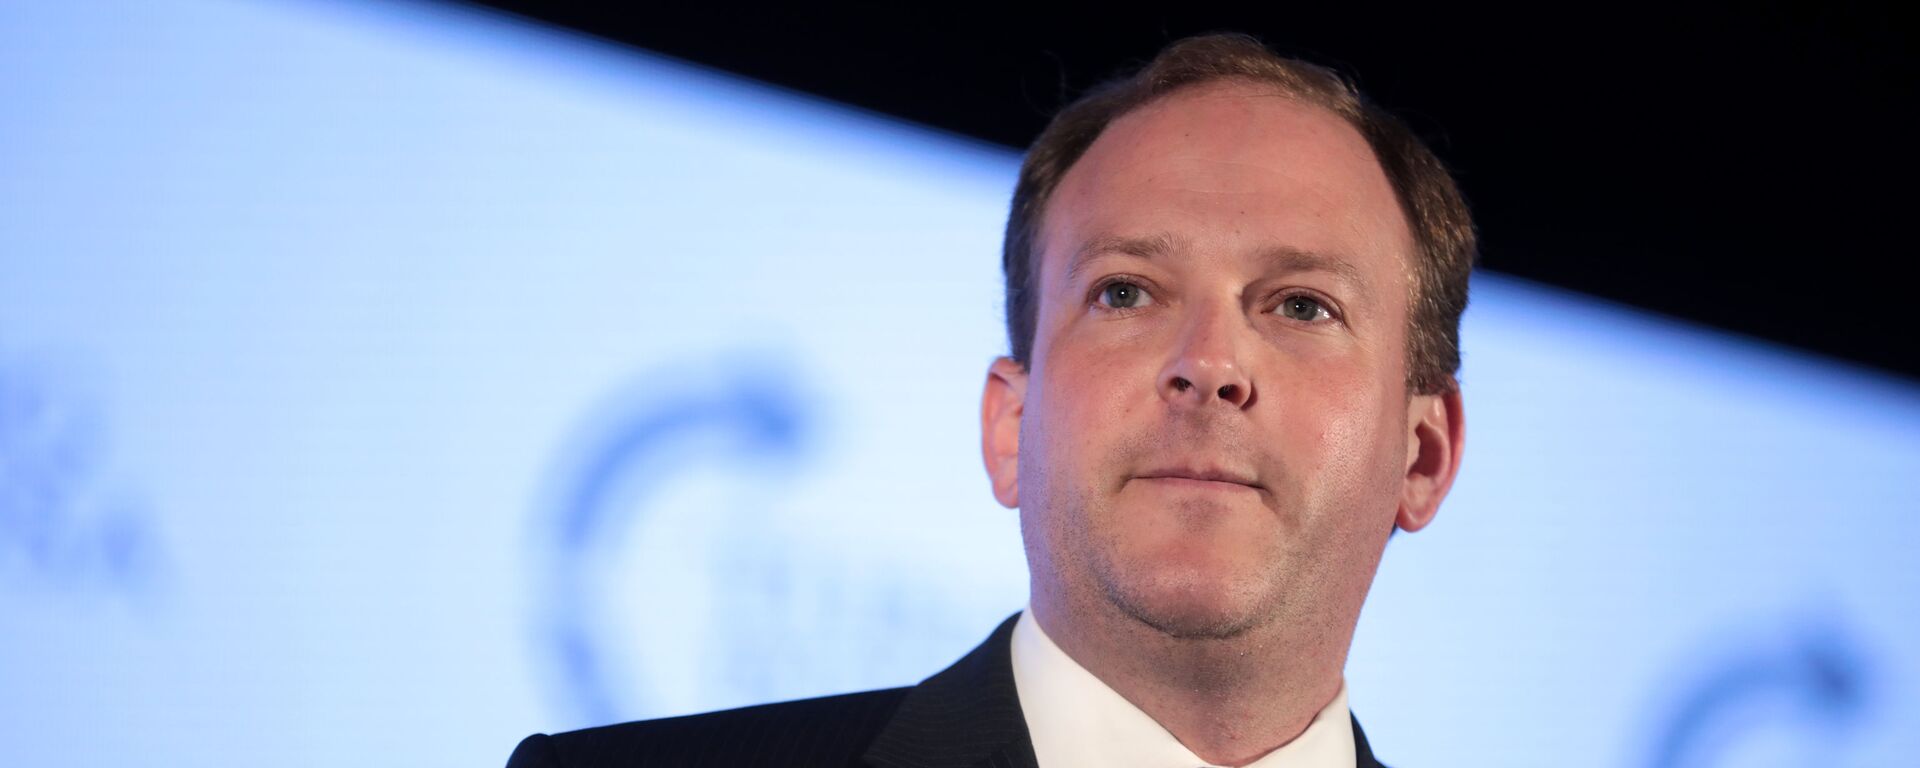 US Rep. Lee Zeldin (R-NY) speaking with attendees at the 2019 Teen Student Action Summit hosted by Turning Point USA at the Marriott Marquis in Washington, D.C. - Sputnik International, 1920, 22.07.2022